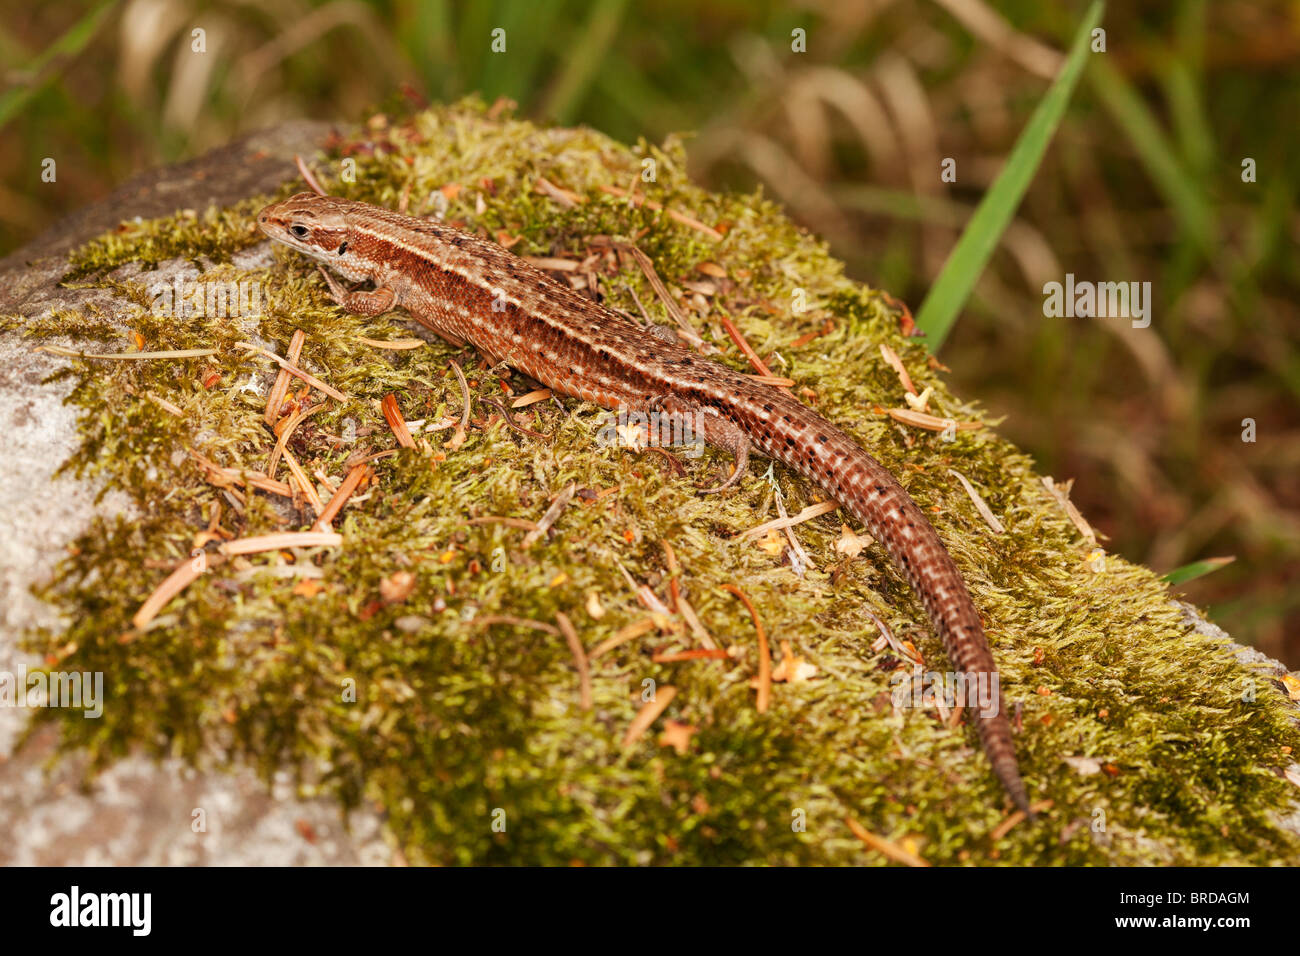 Female common lizard on a moss covered rock. Stock Photo